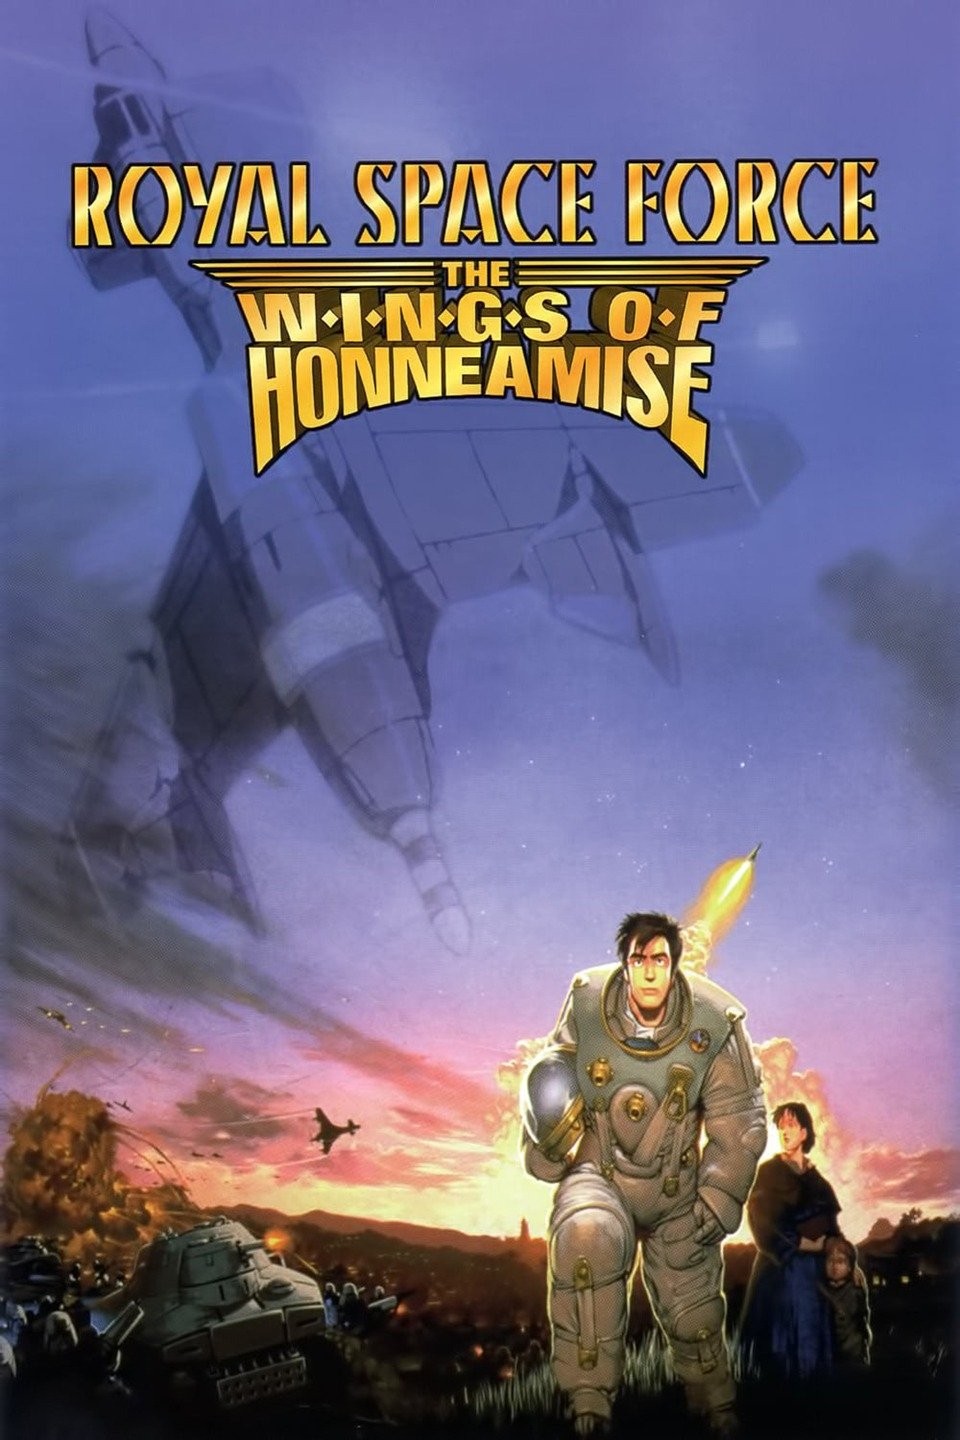 Royal Space Force: The Wings of Honnêamise - Wikipedia